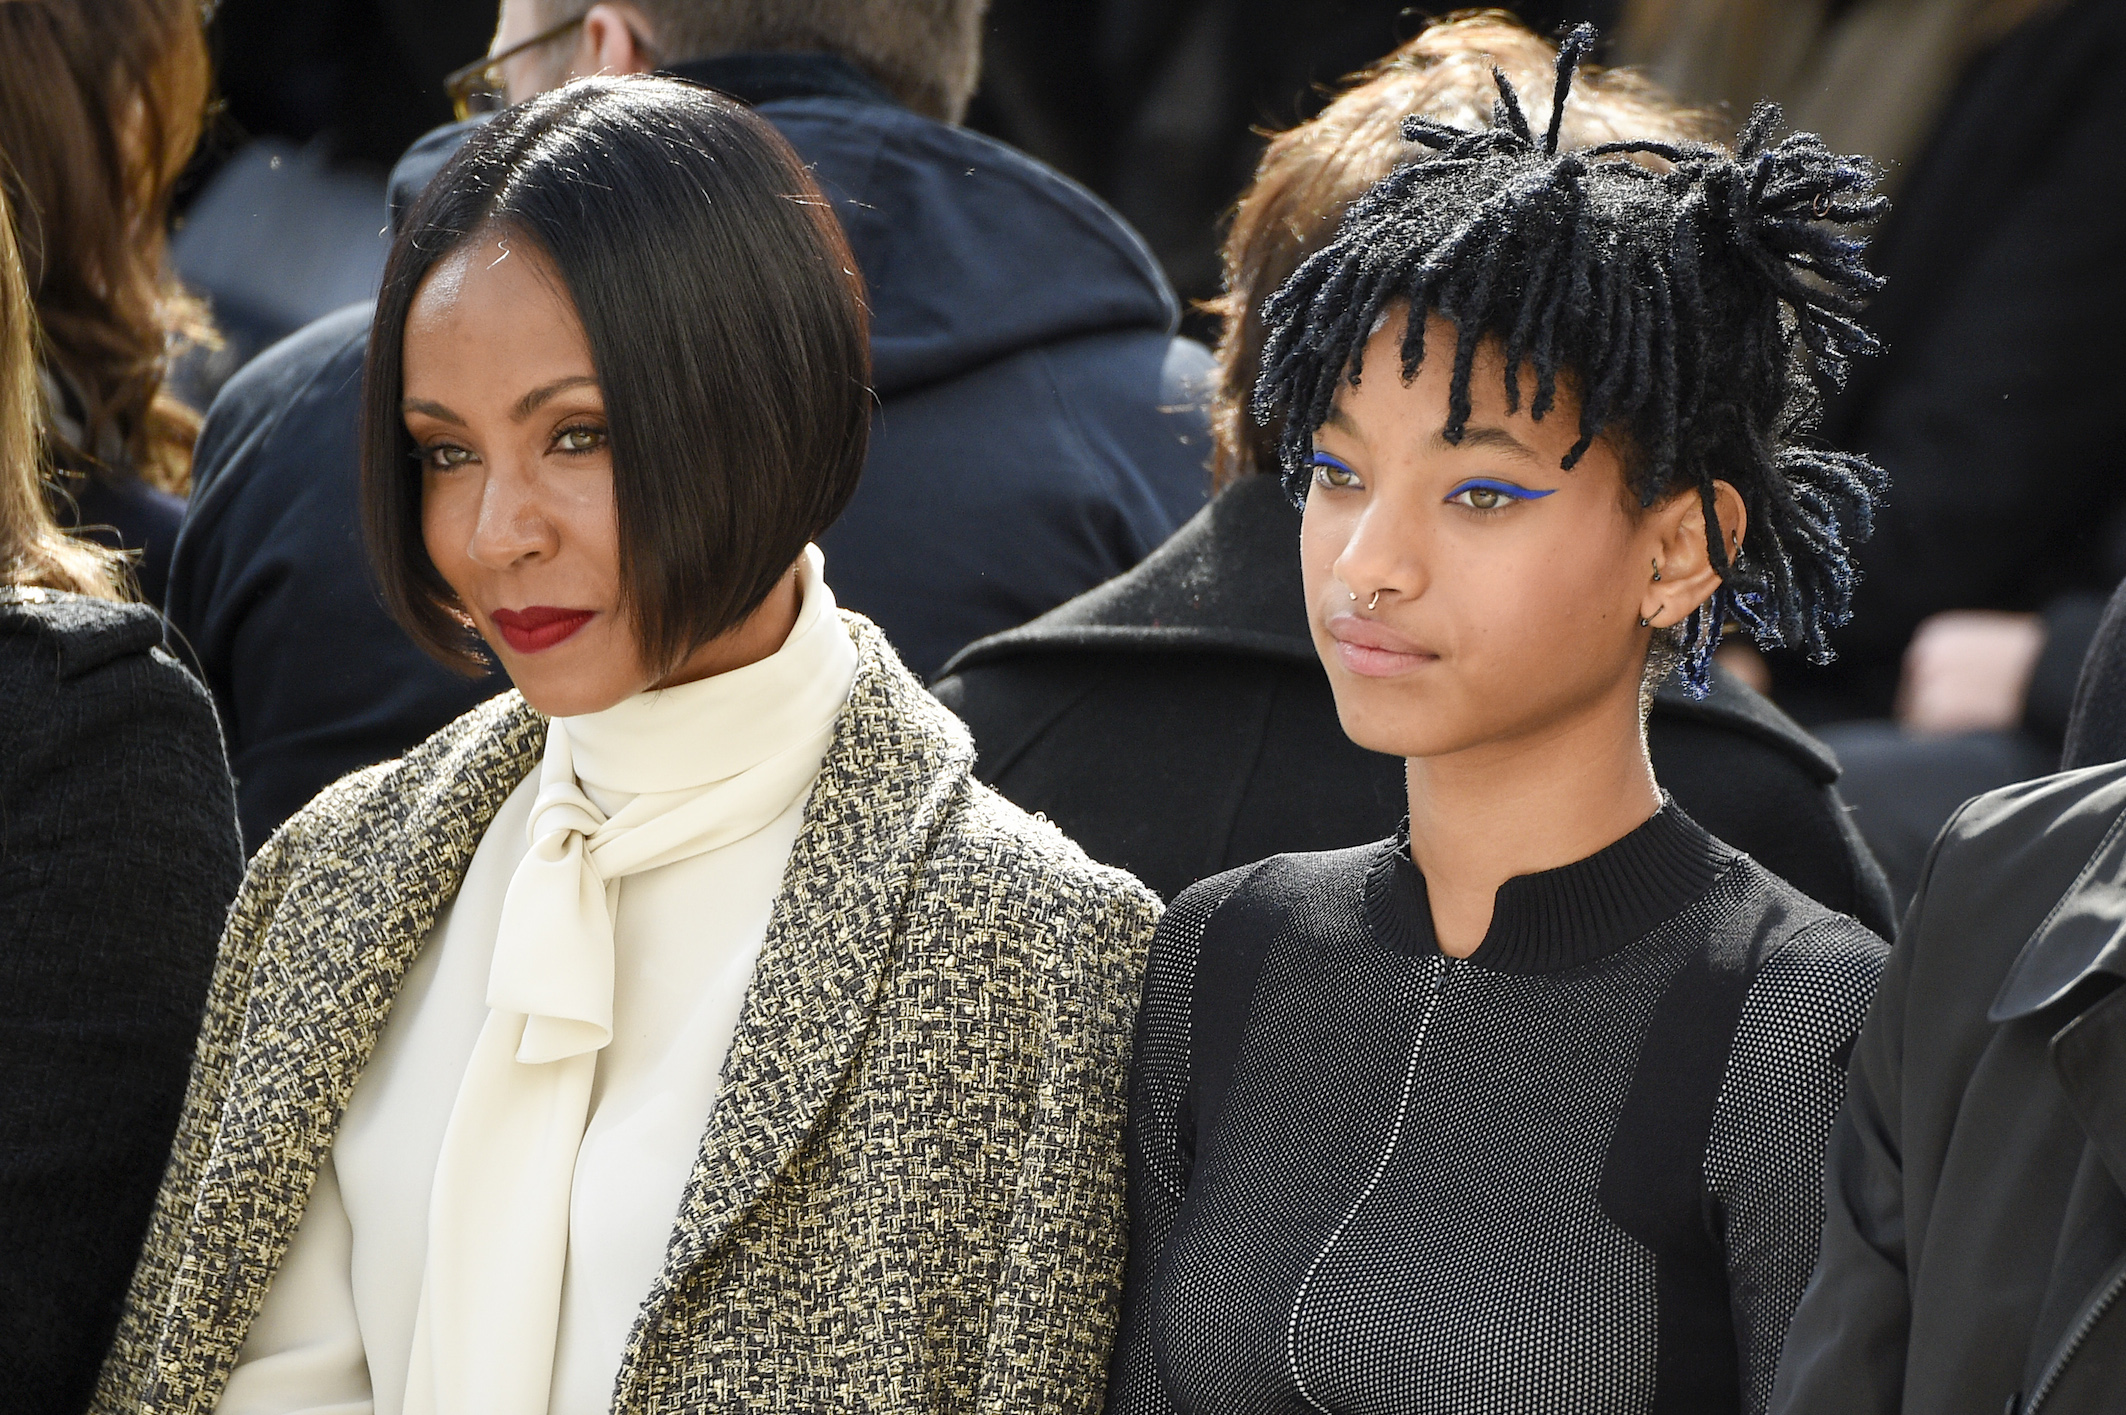 Jada Pinkett Smith and Willow Smith attend the Chanel show